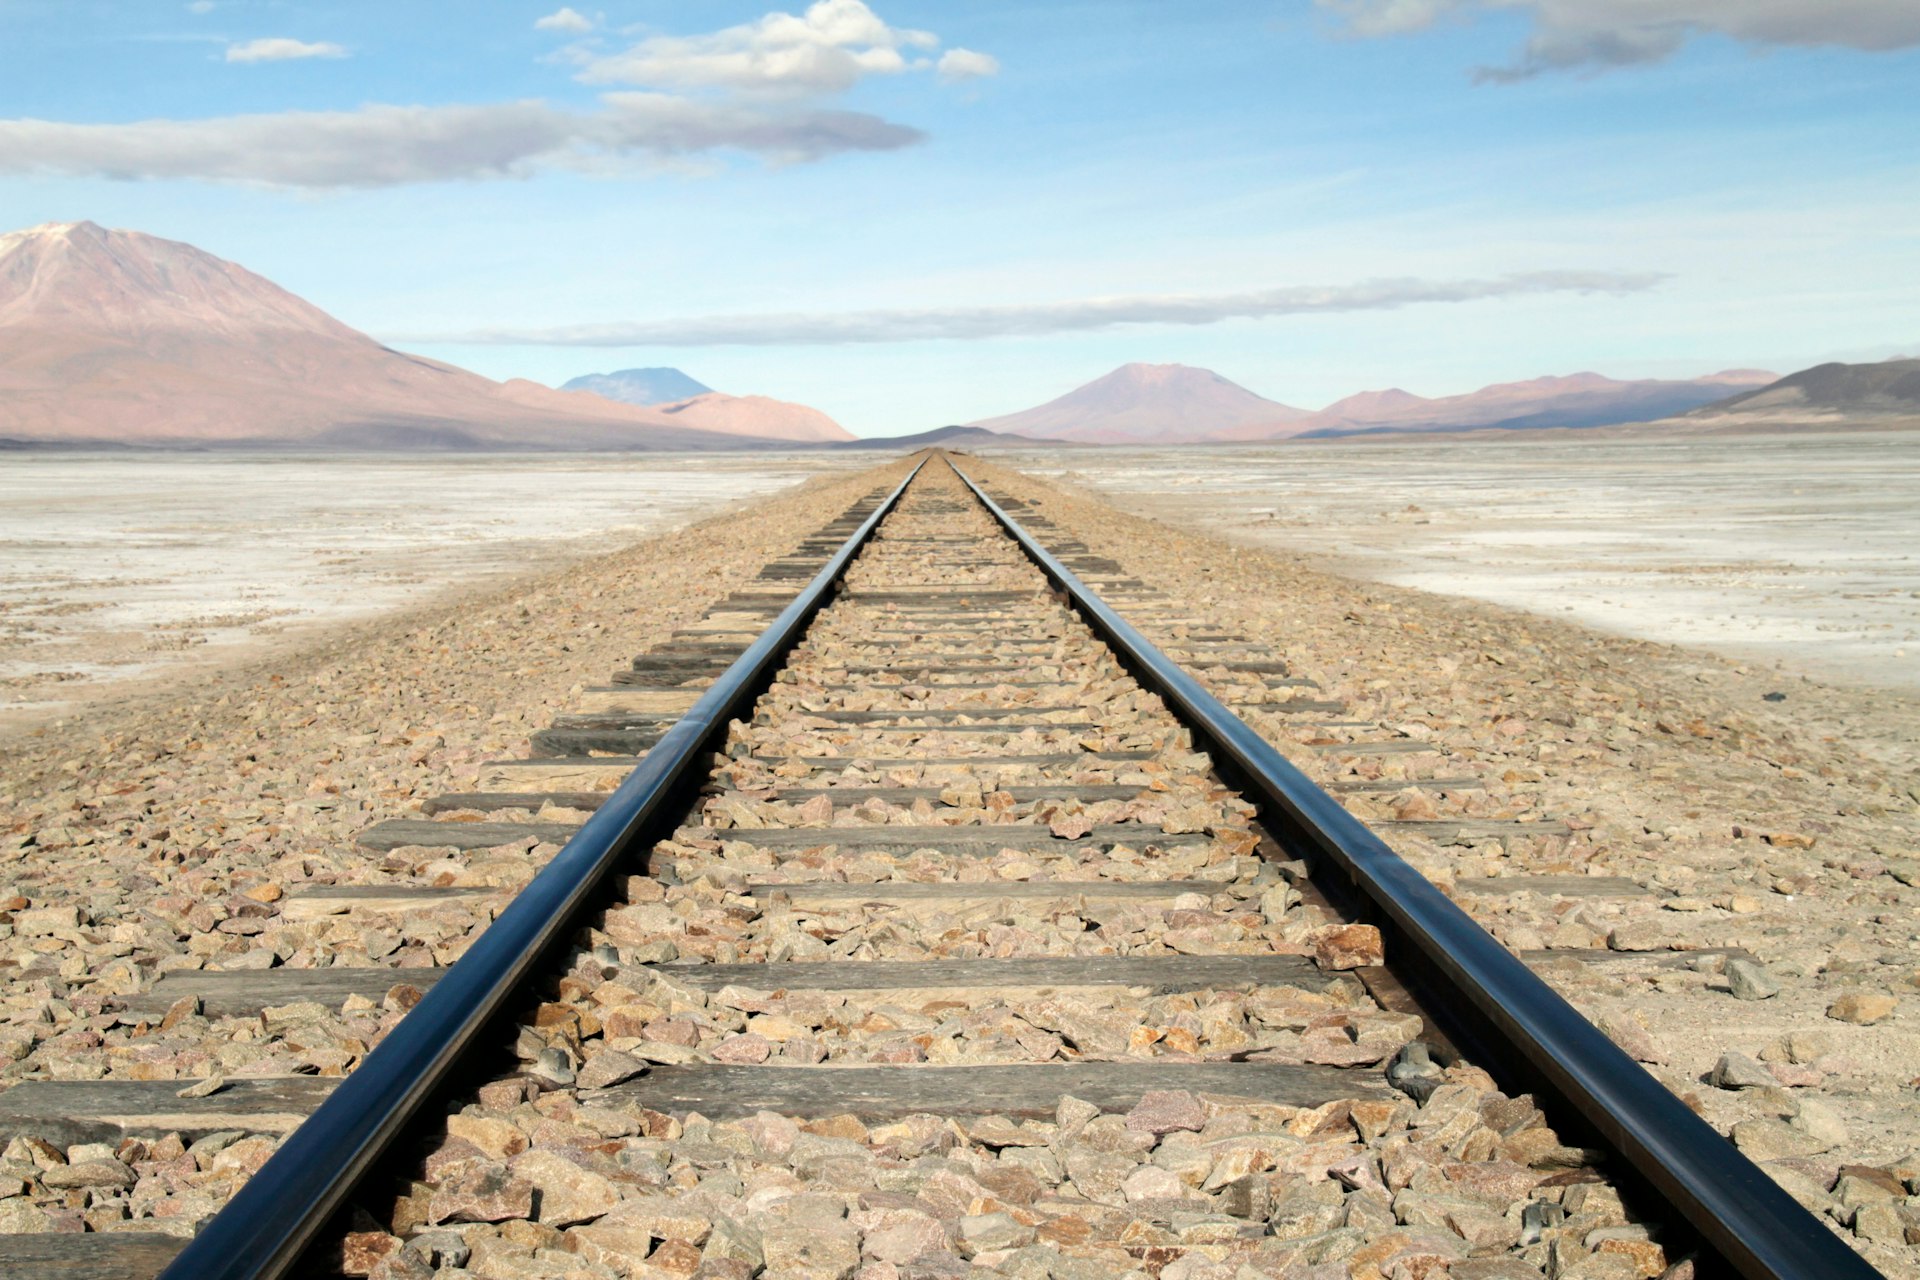 Rail lines stretch off straight into the distance across white salt flats surrounded by red-brown mountains